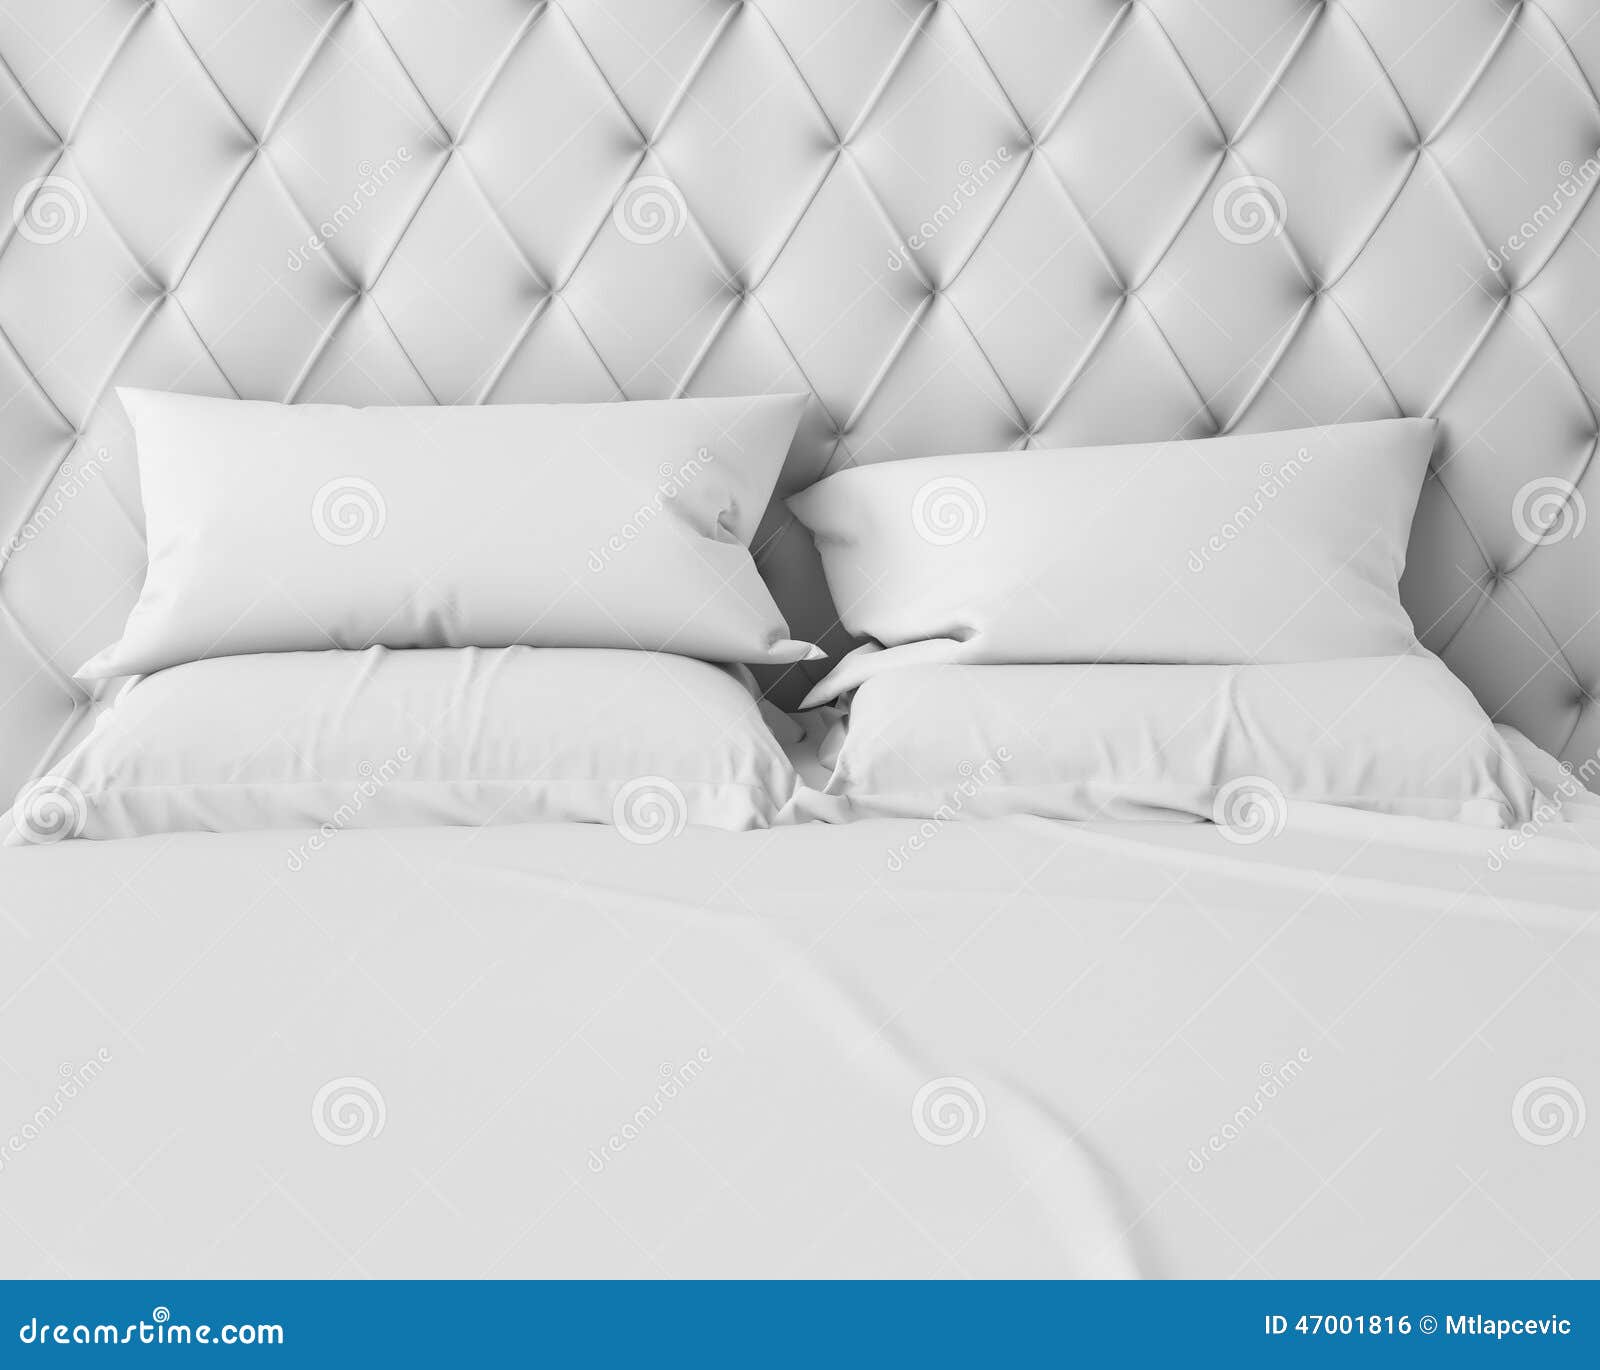 empty white bed and pillows with luxury headboard